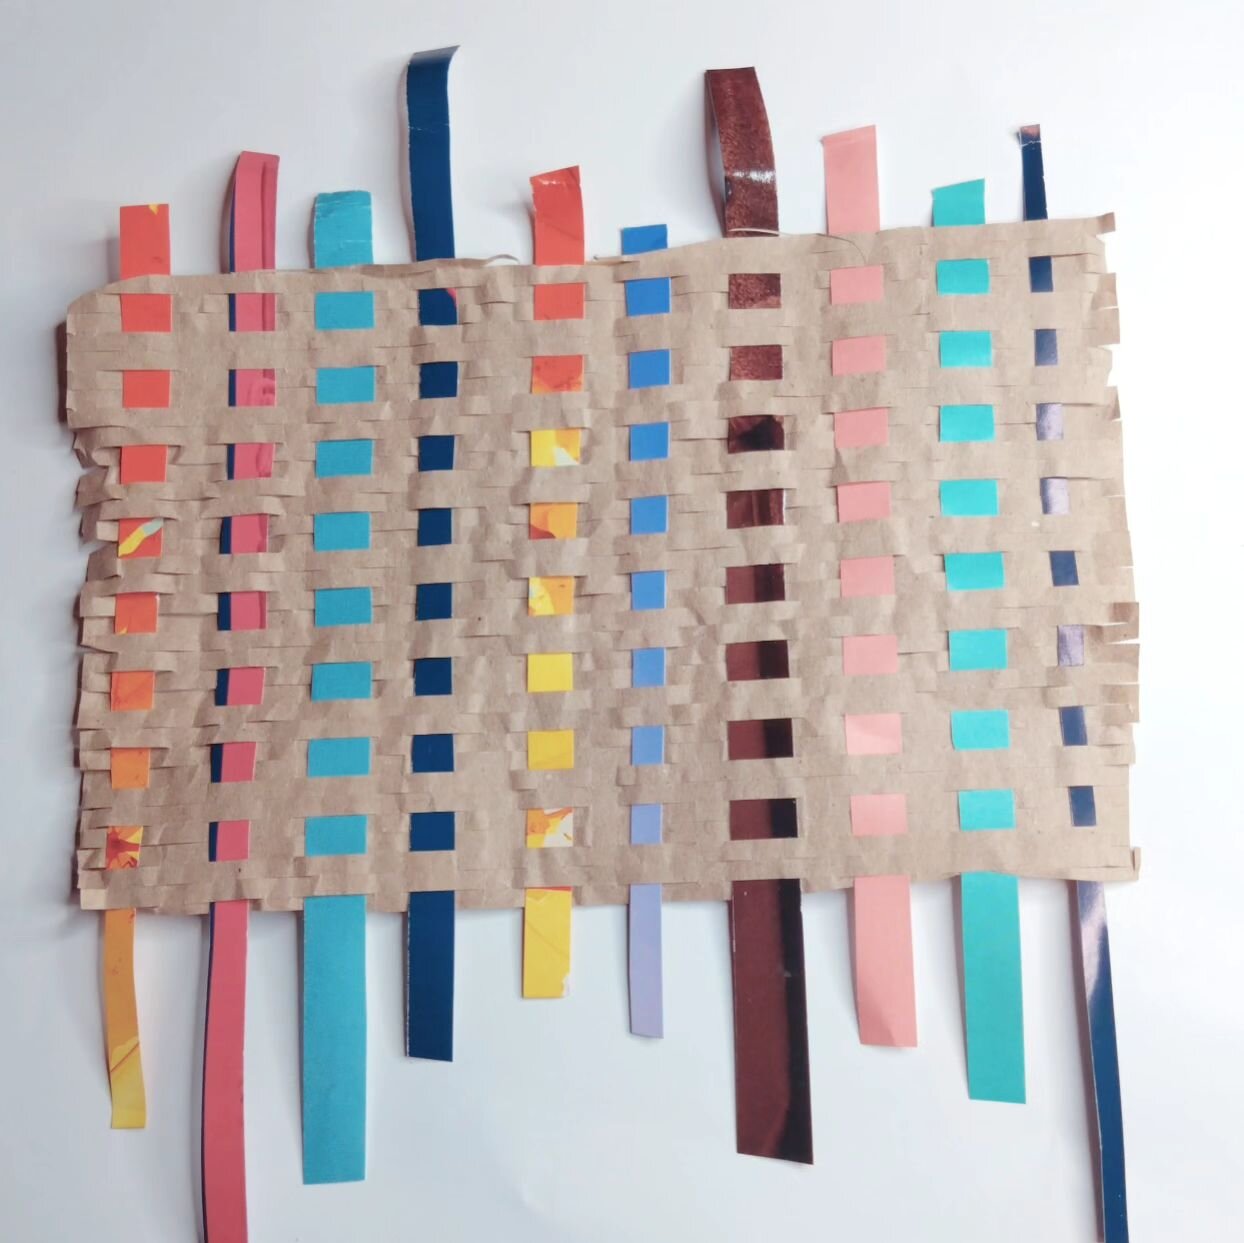 Weaving with paper this week in Arts on Referral.

A combination of packaging paper, strips cut from magazines and watercolour paper from last week's session.

The participants in the group were wonderfully imaginative with what they created. A joy t